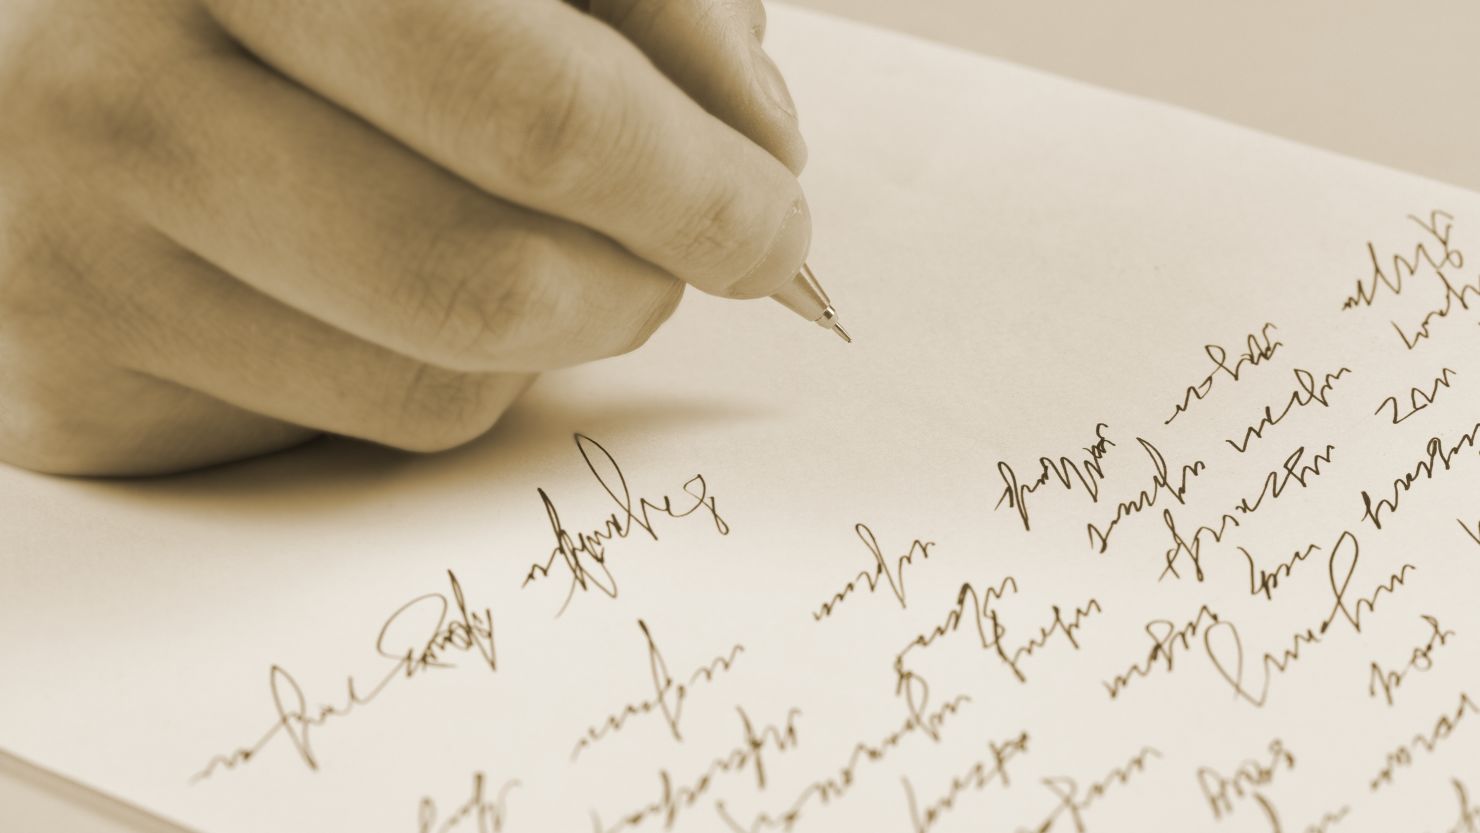 Blame keyboards? A 2012 study found that 33% of people had difficulty reading their own handwriting.